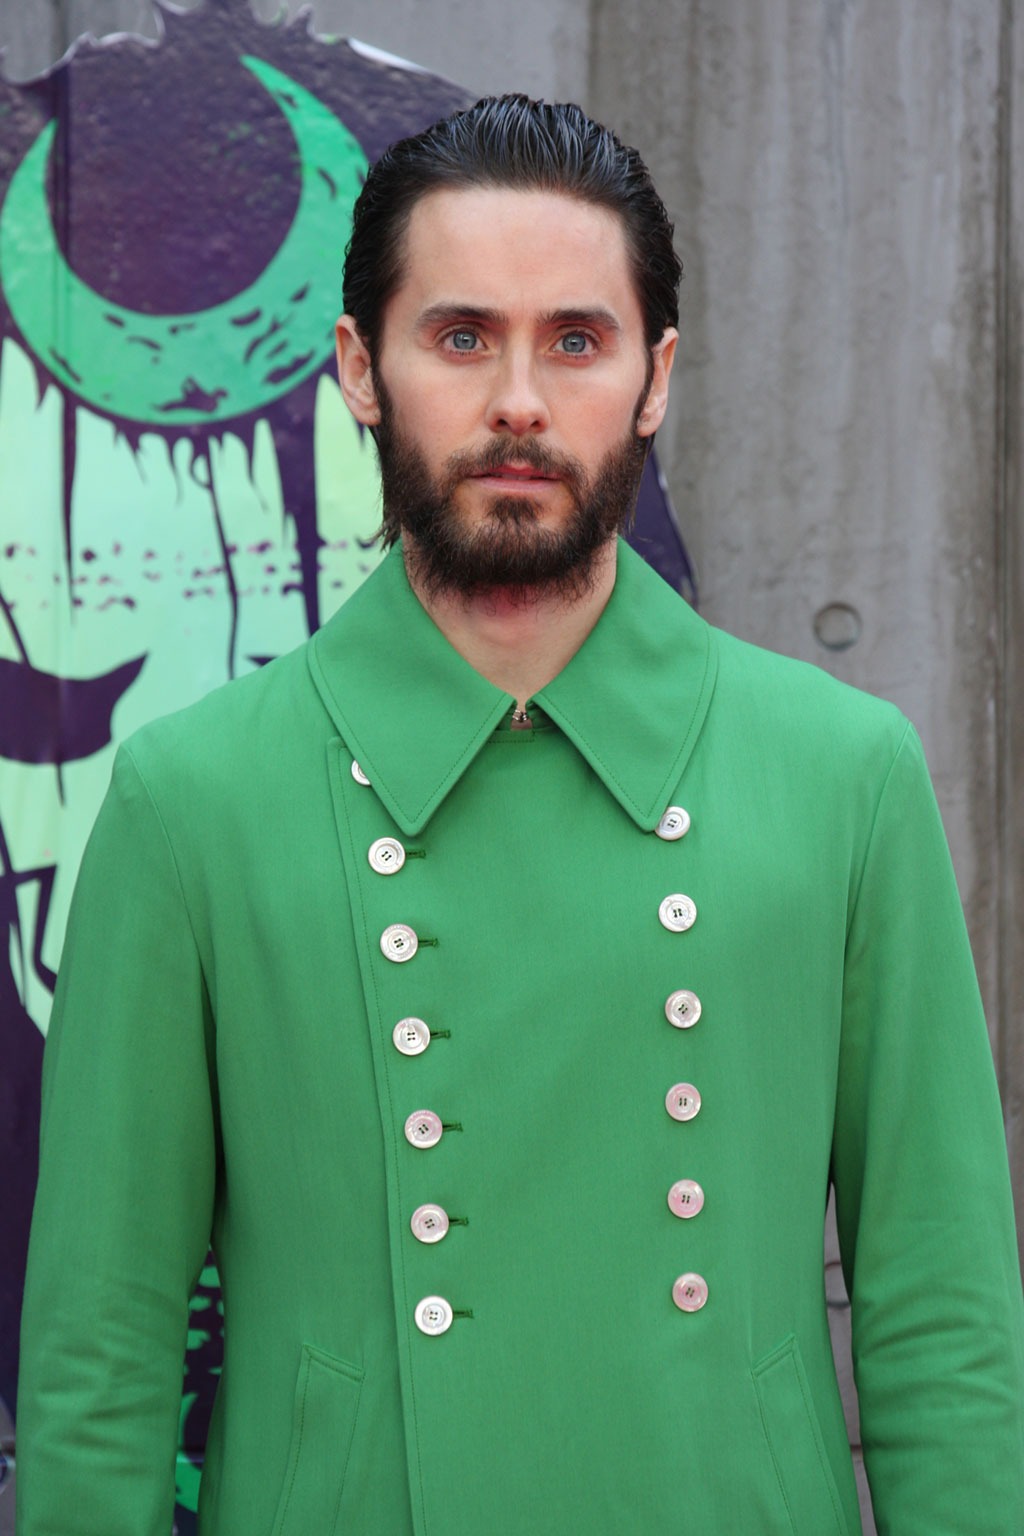 Jared Leto Celebrities Older Than You Thought